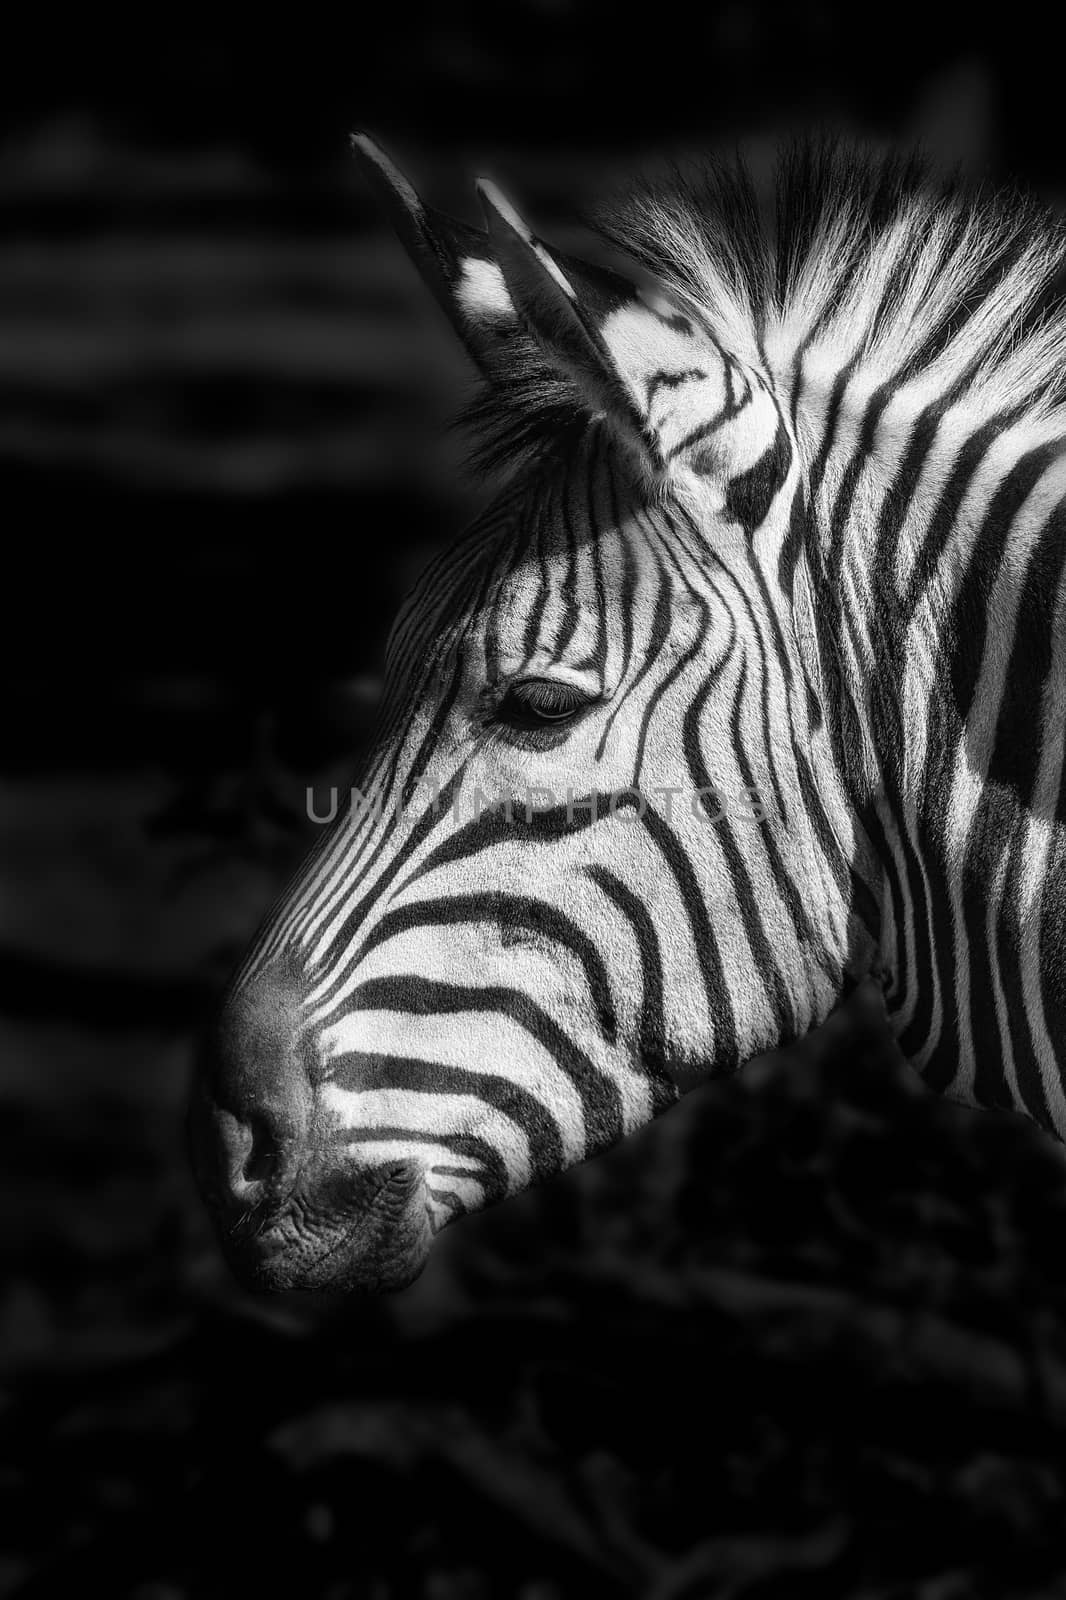 Photo of the head of a zebra in black and white